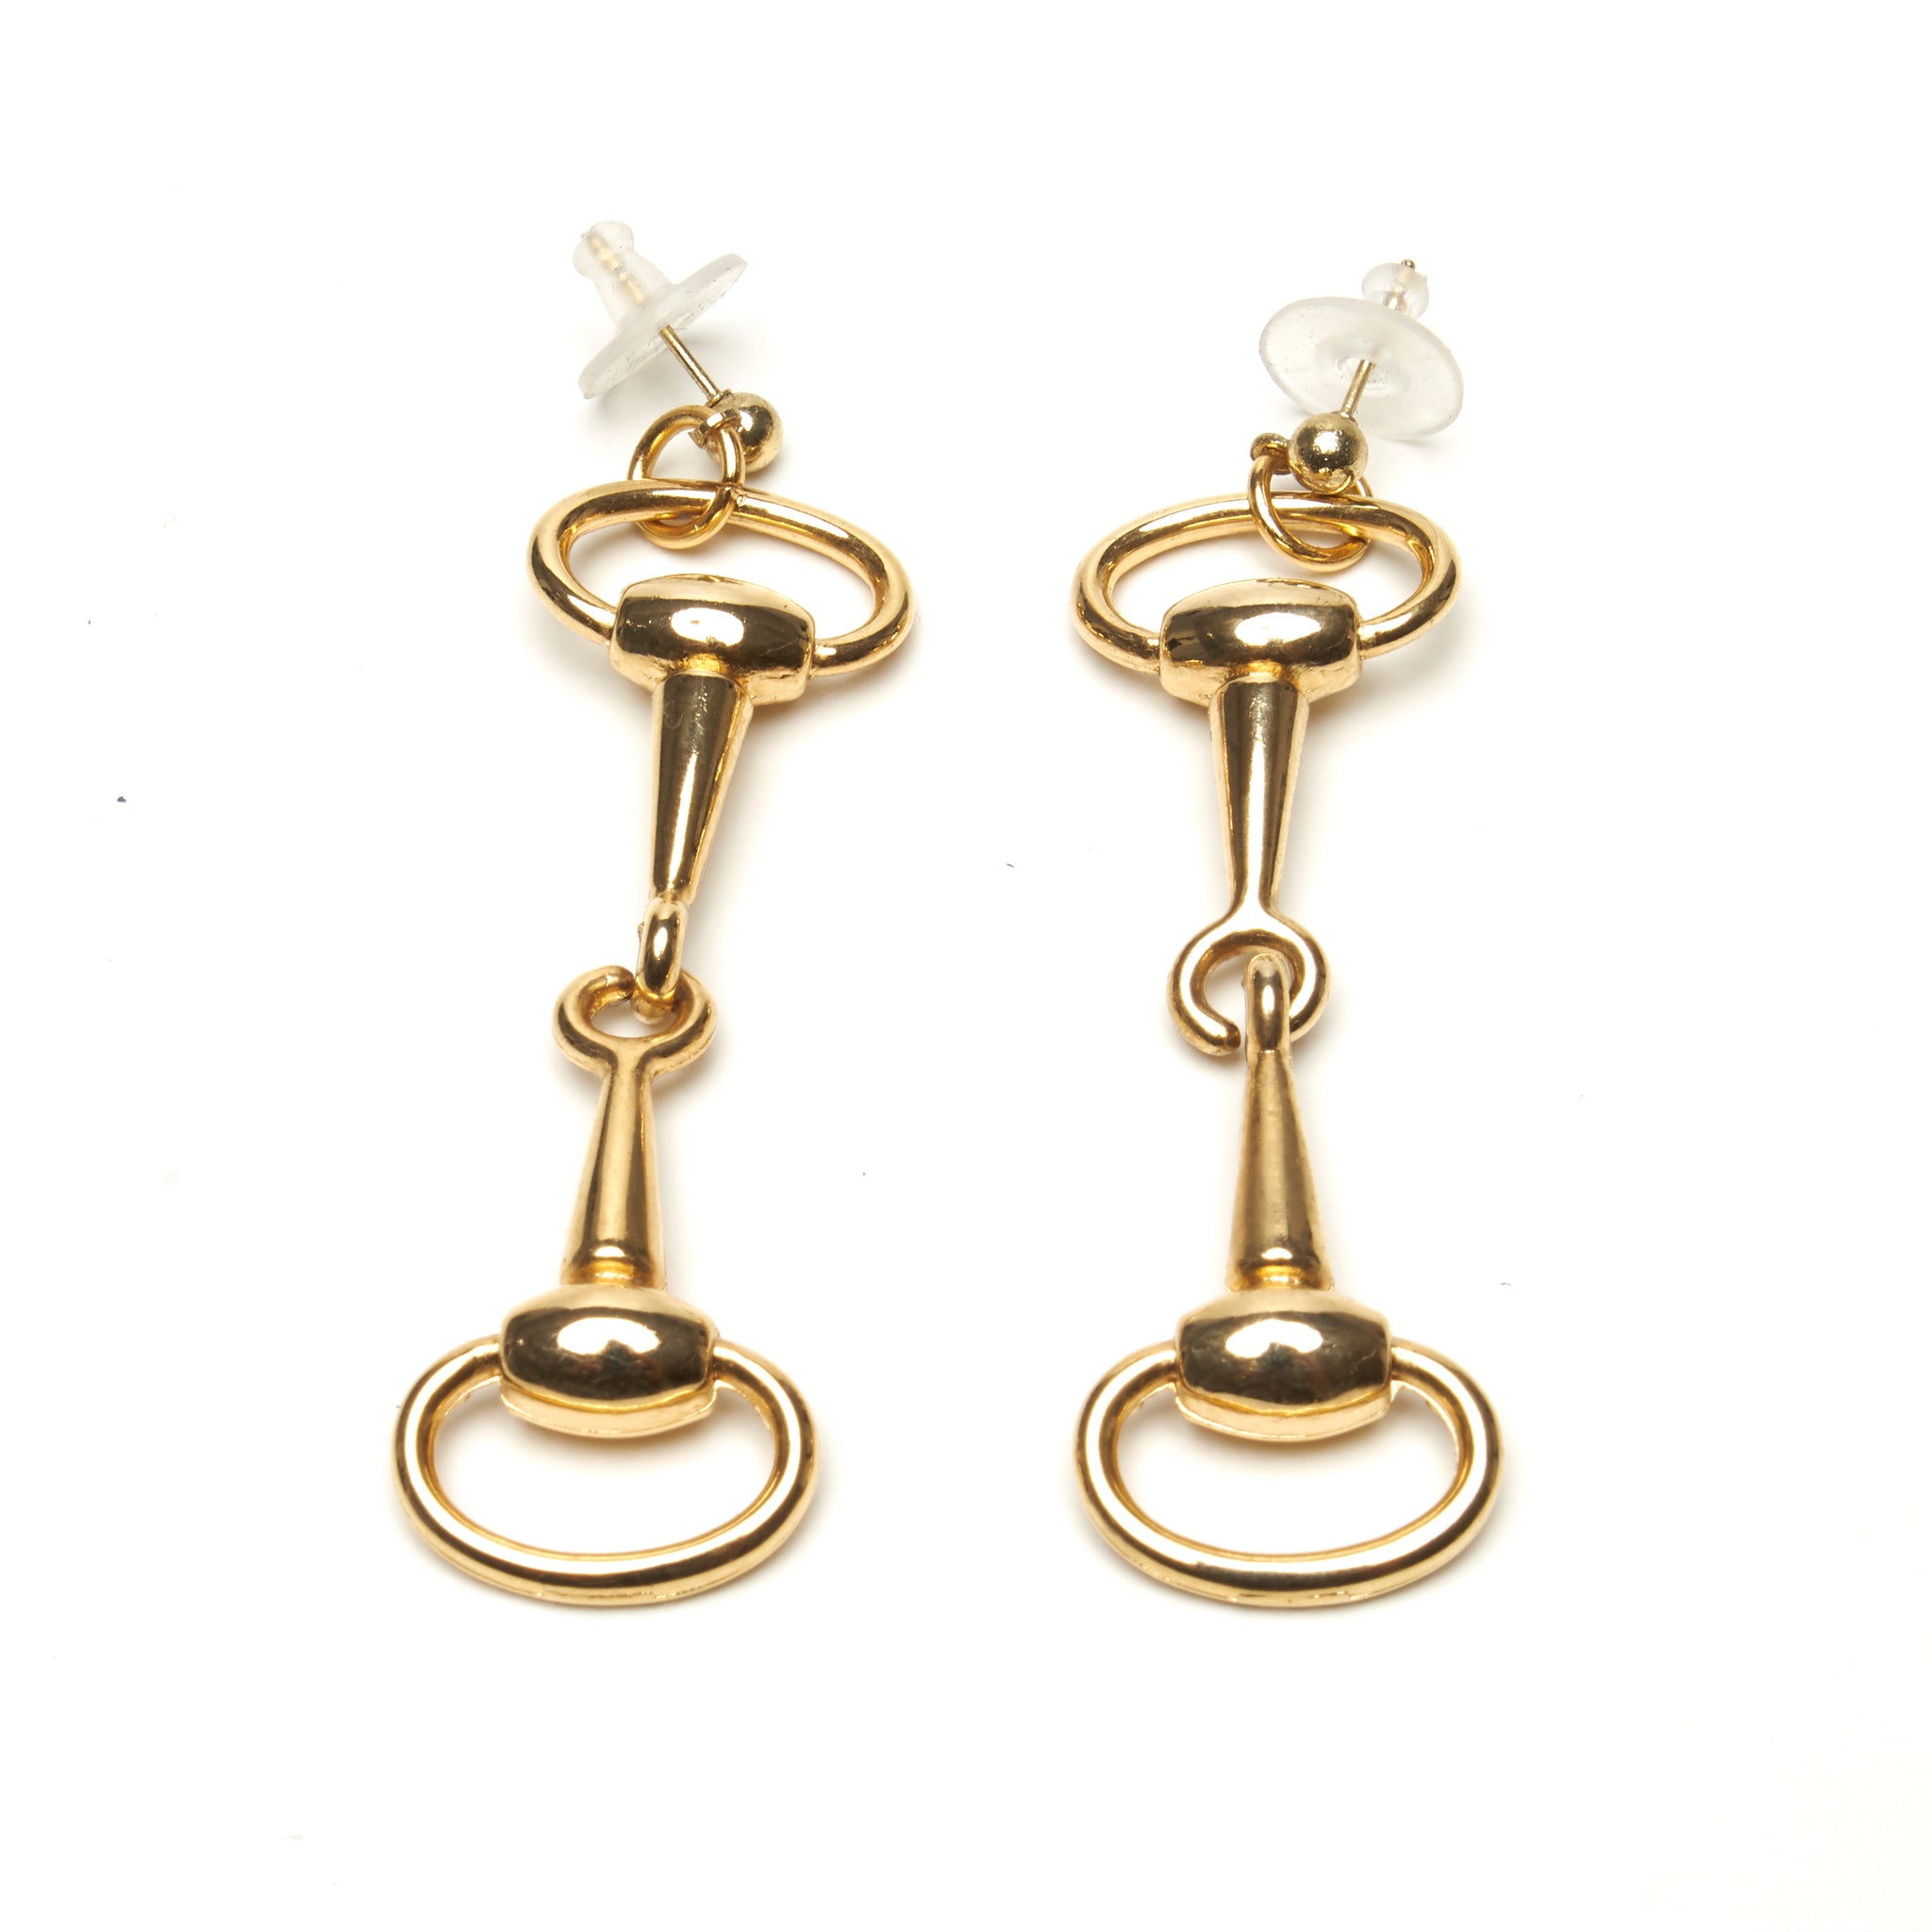 D-RING HORSE-BIT EARRINGS BY NYET JEWELRY.